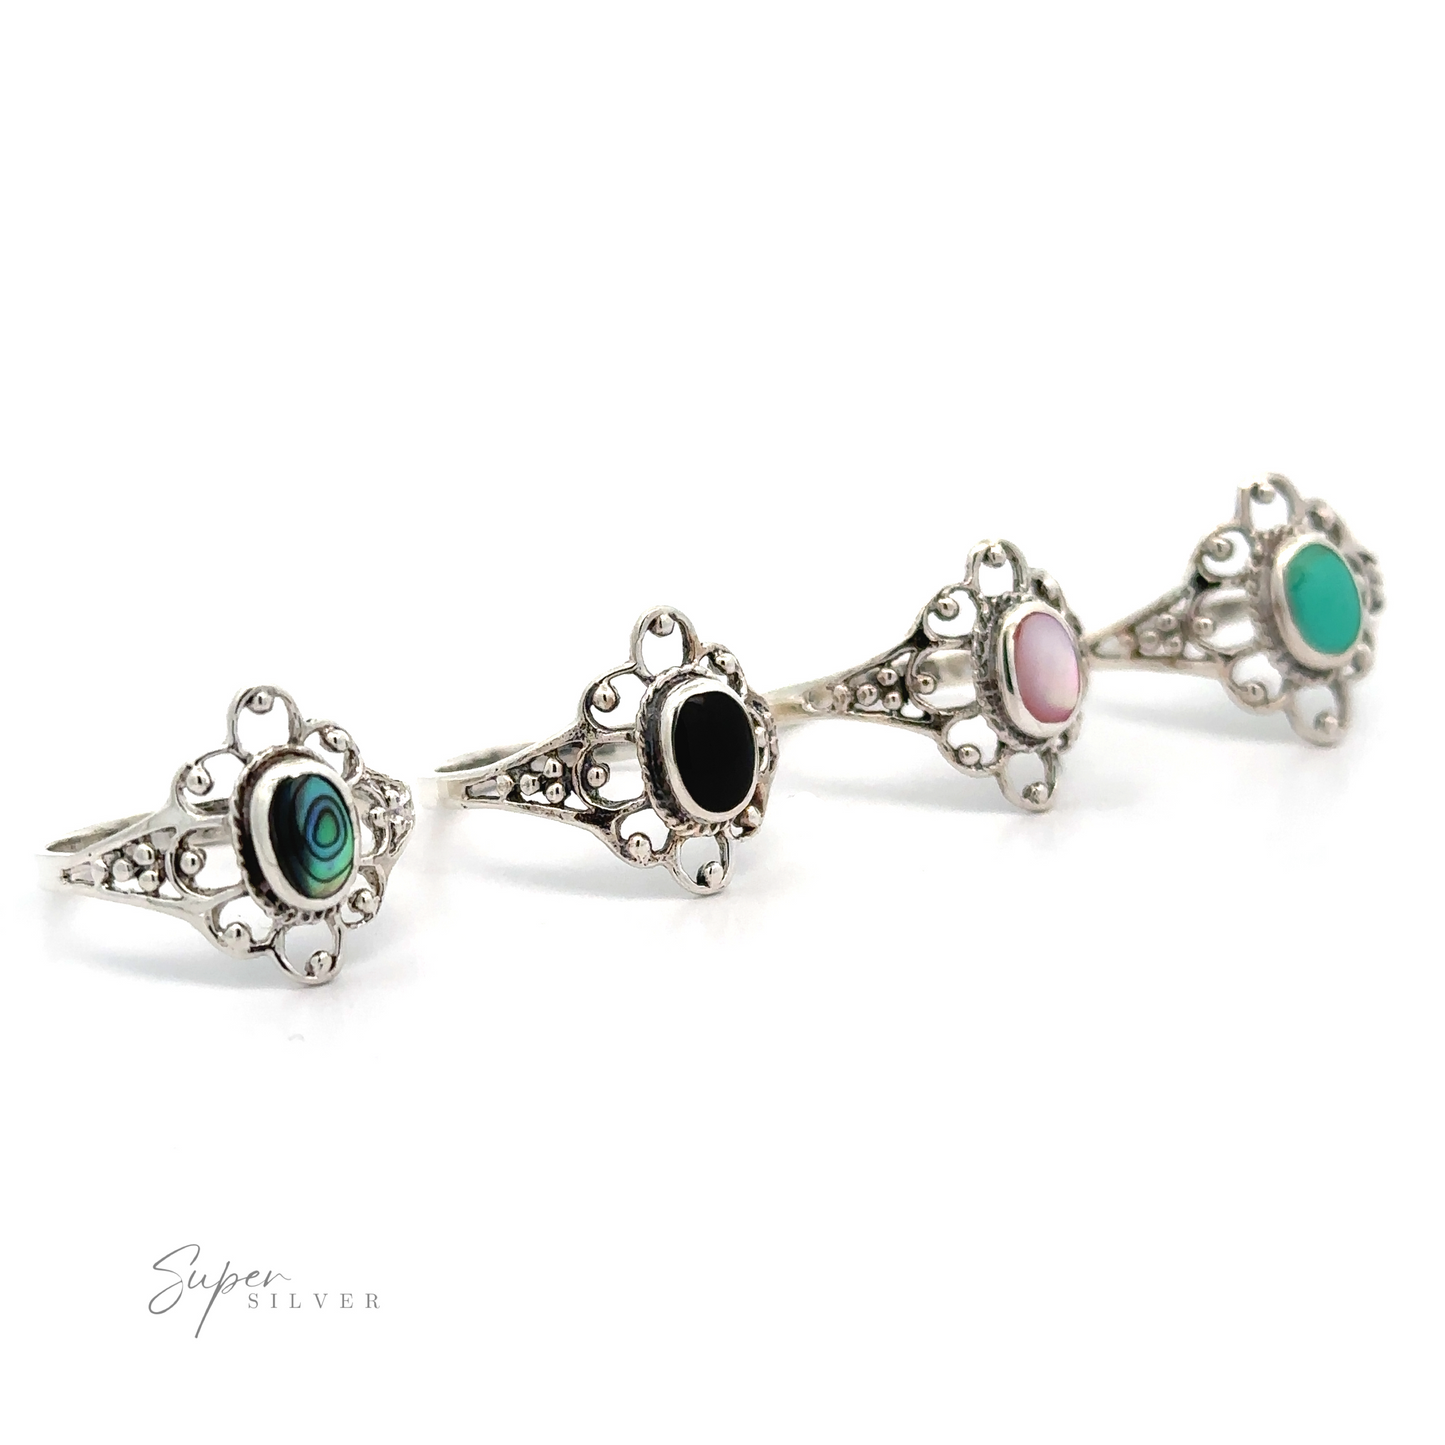 A row of Vintage-Styled Flower Rings with Inlaid Stones, each exuding vintage appeal with lacy petals.